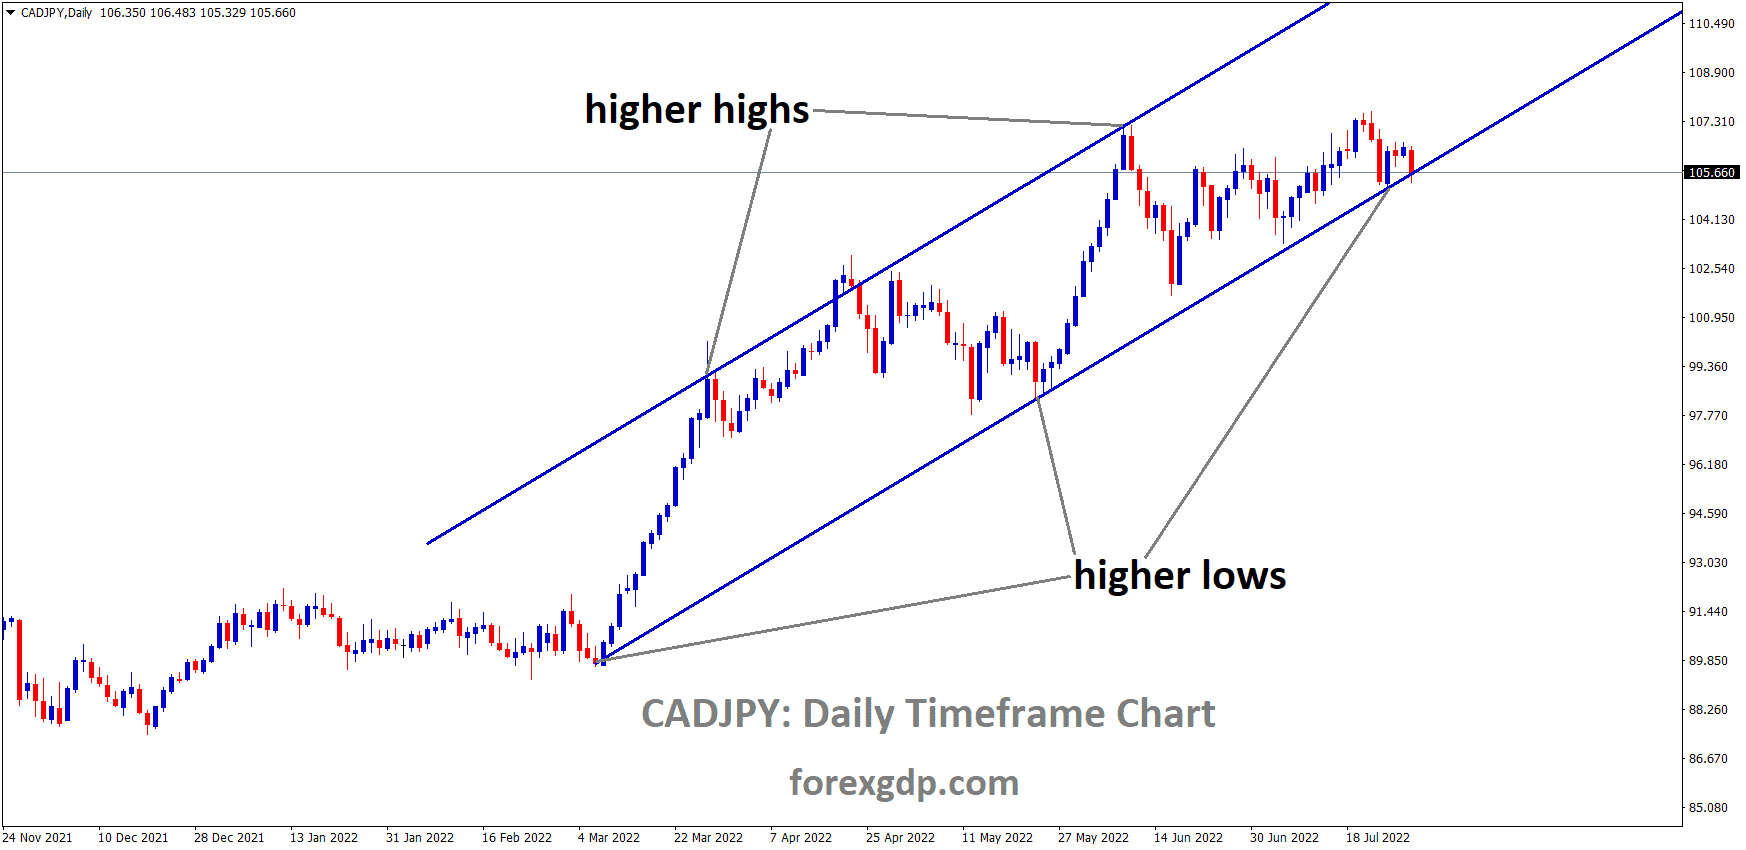 CADJPY is moving in an Ascending channel and the Market has reached the higher low area of the channel